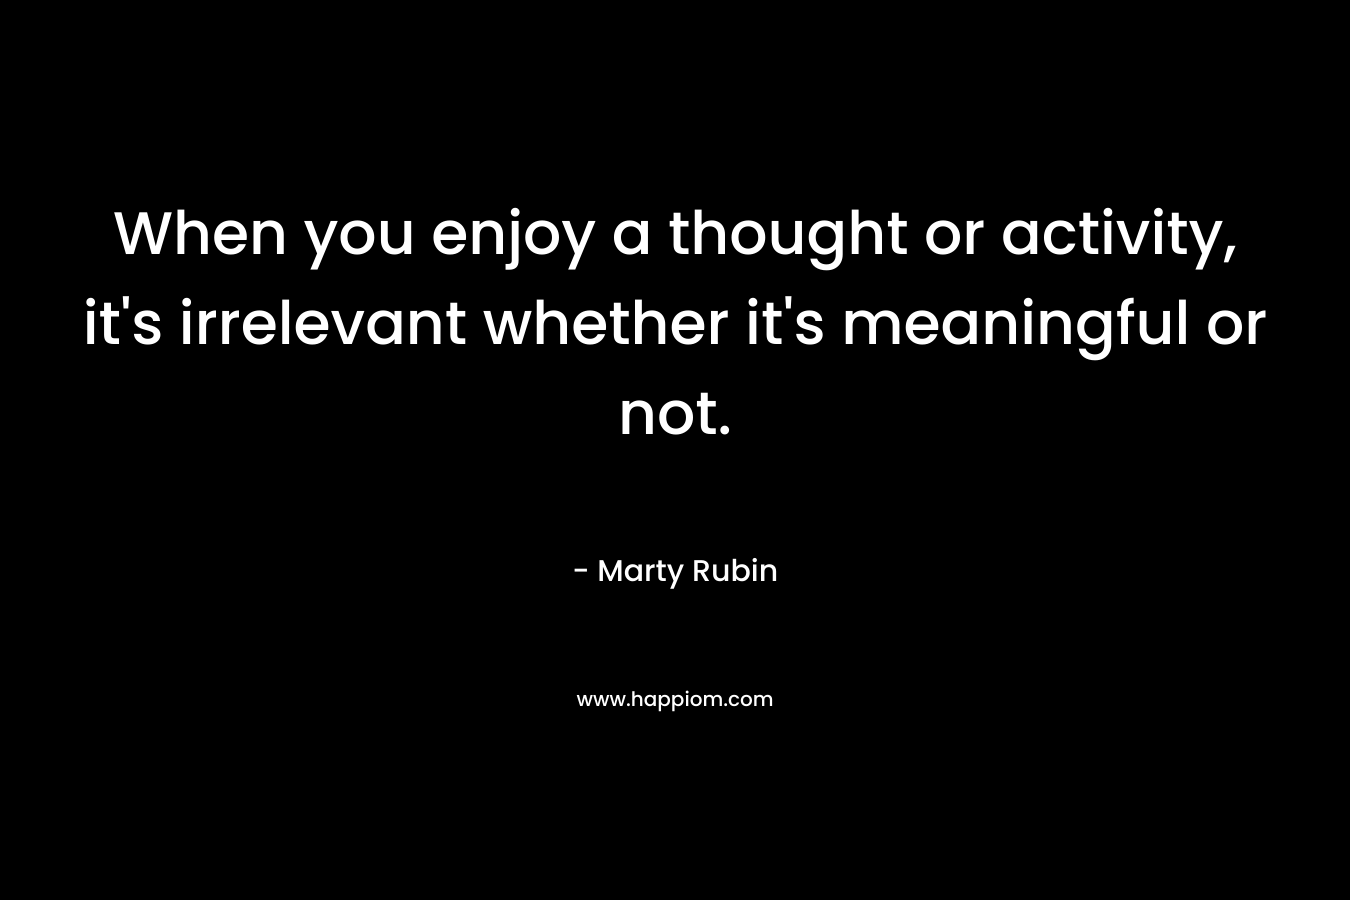 When you enjoy a thought or activity, it’s irrelevant whether it’s meaningful or not. – Marty Rubin